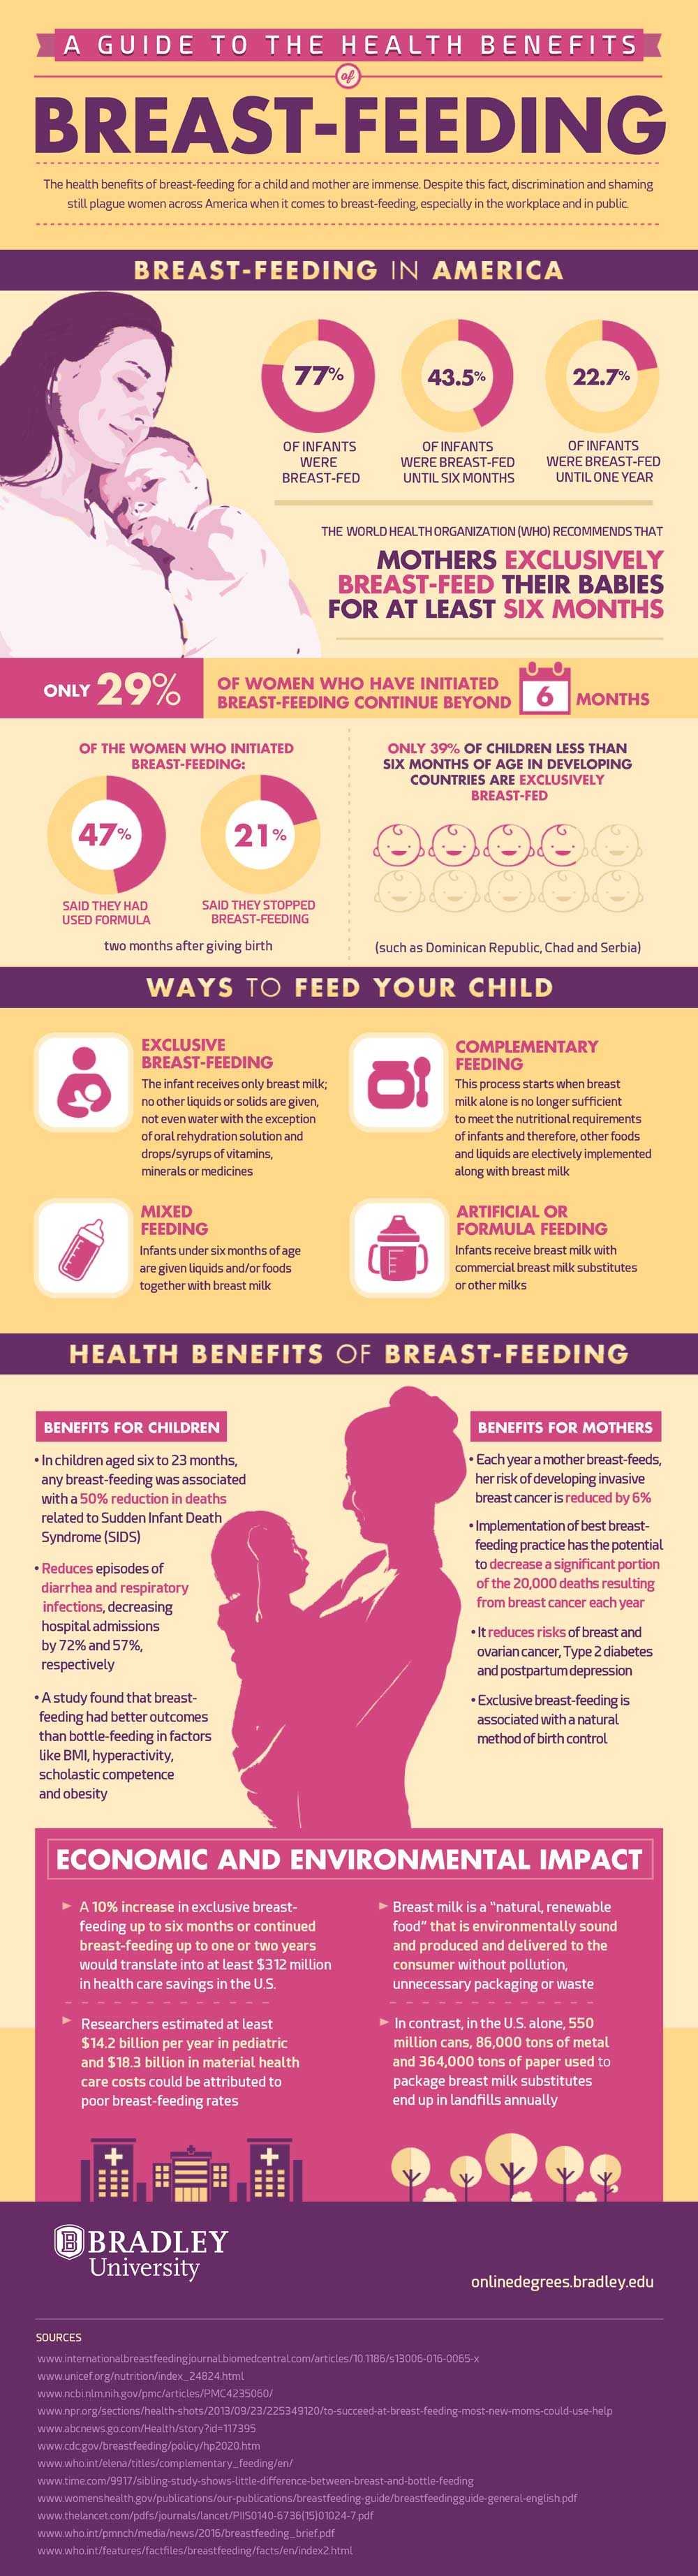 Guide to the Health Benefits of Breastfeeding